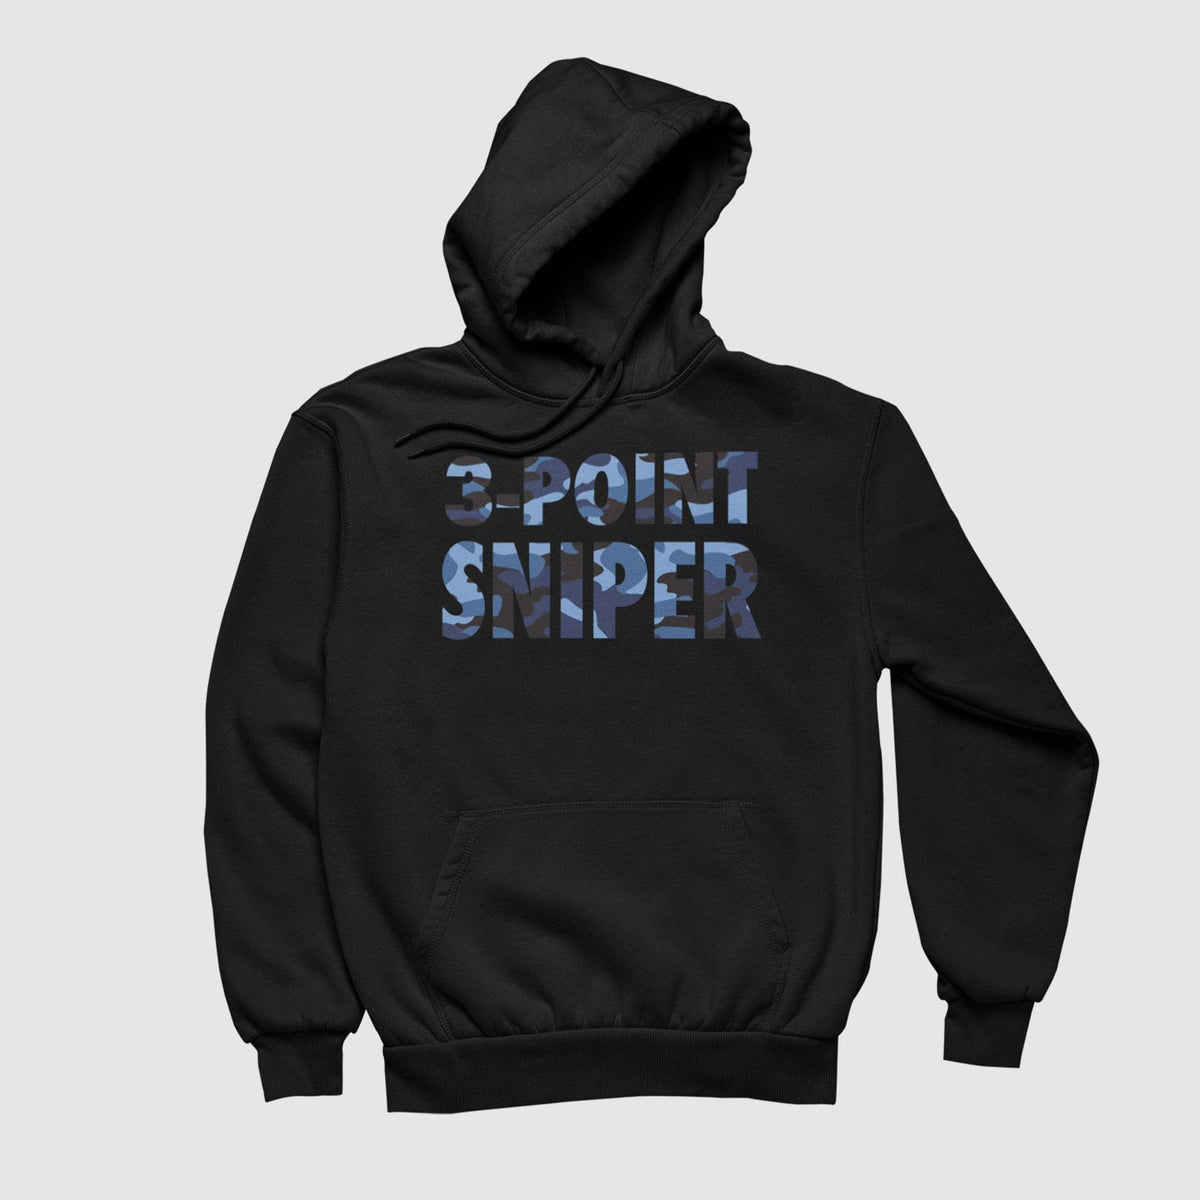 Youth 3-Point Sniper Hoodie